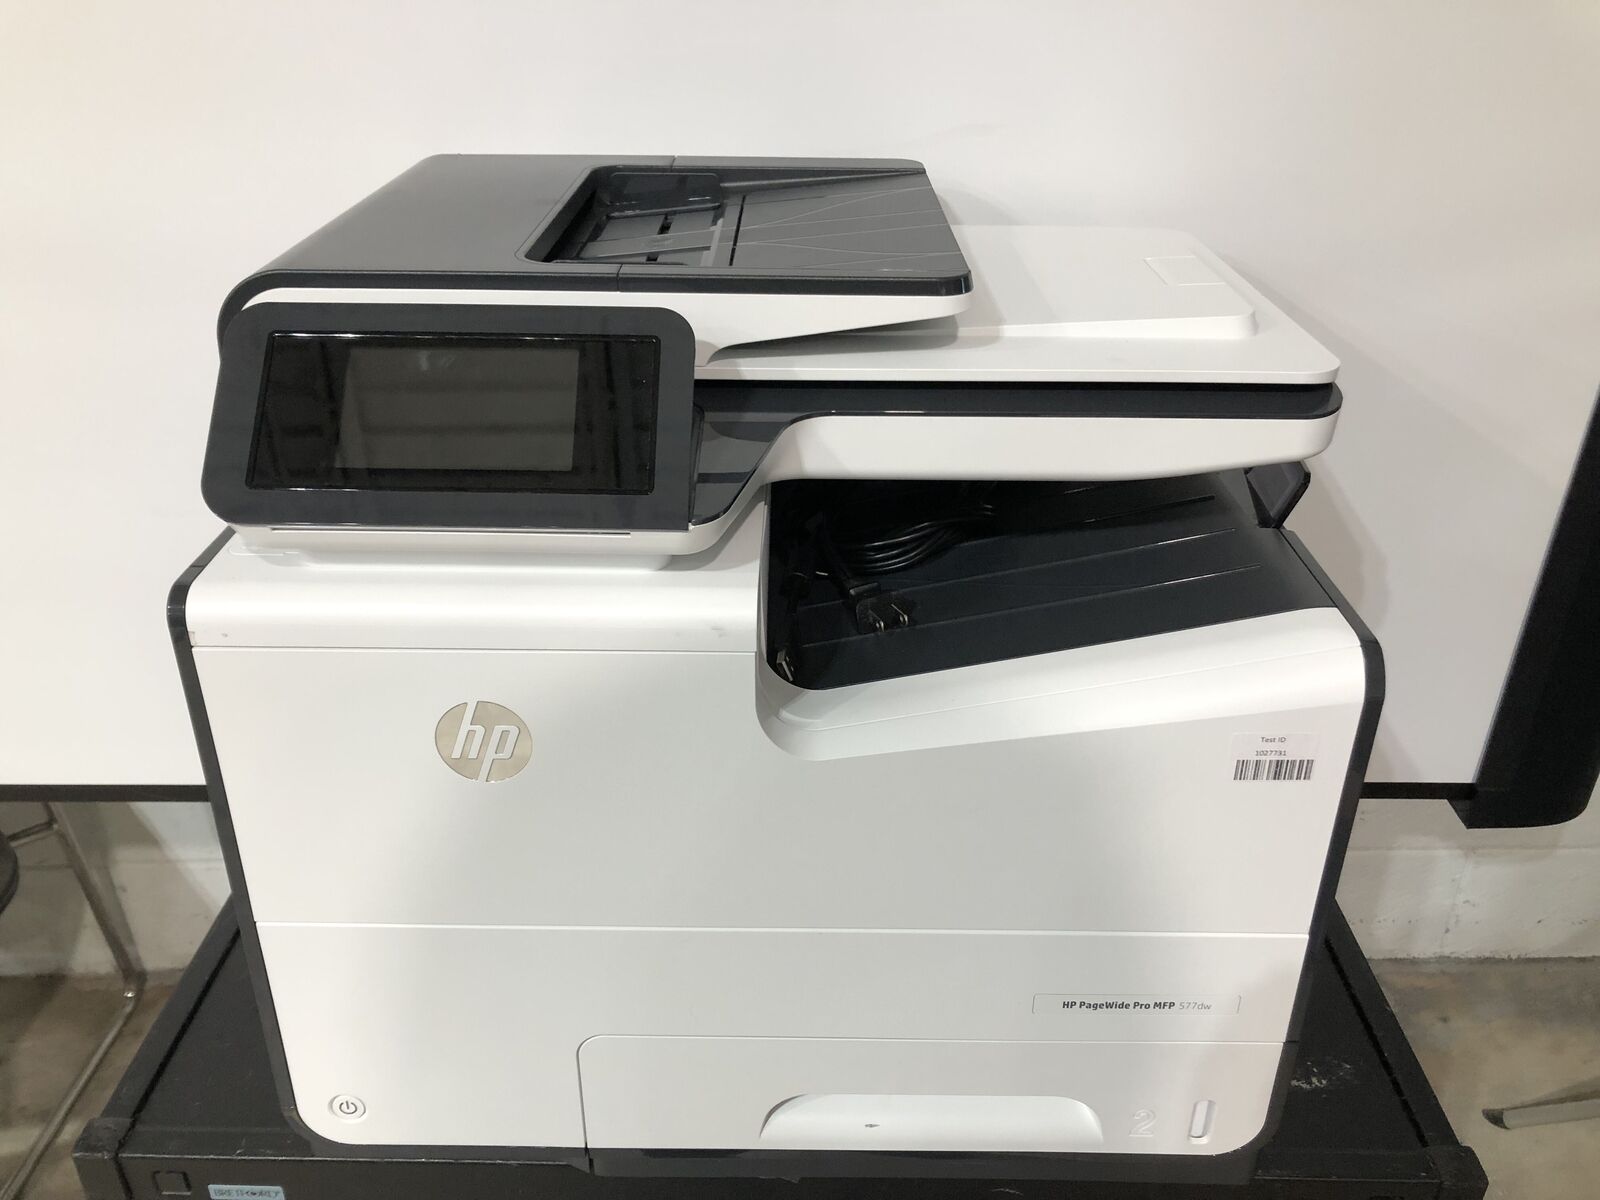 HP PageWide Pro MFP 577dw Wireless All-In-One Printer No Toner - PARTS/REPAIR